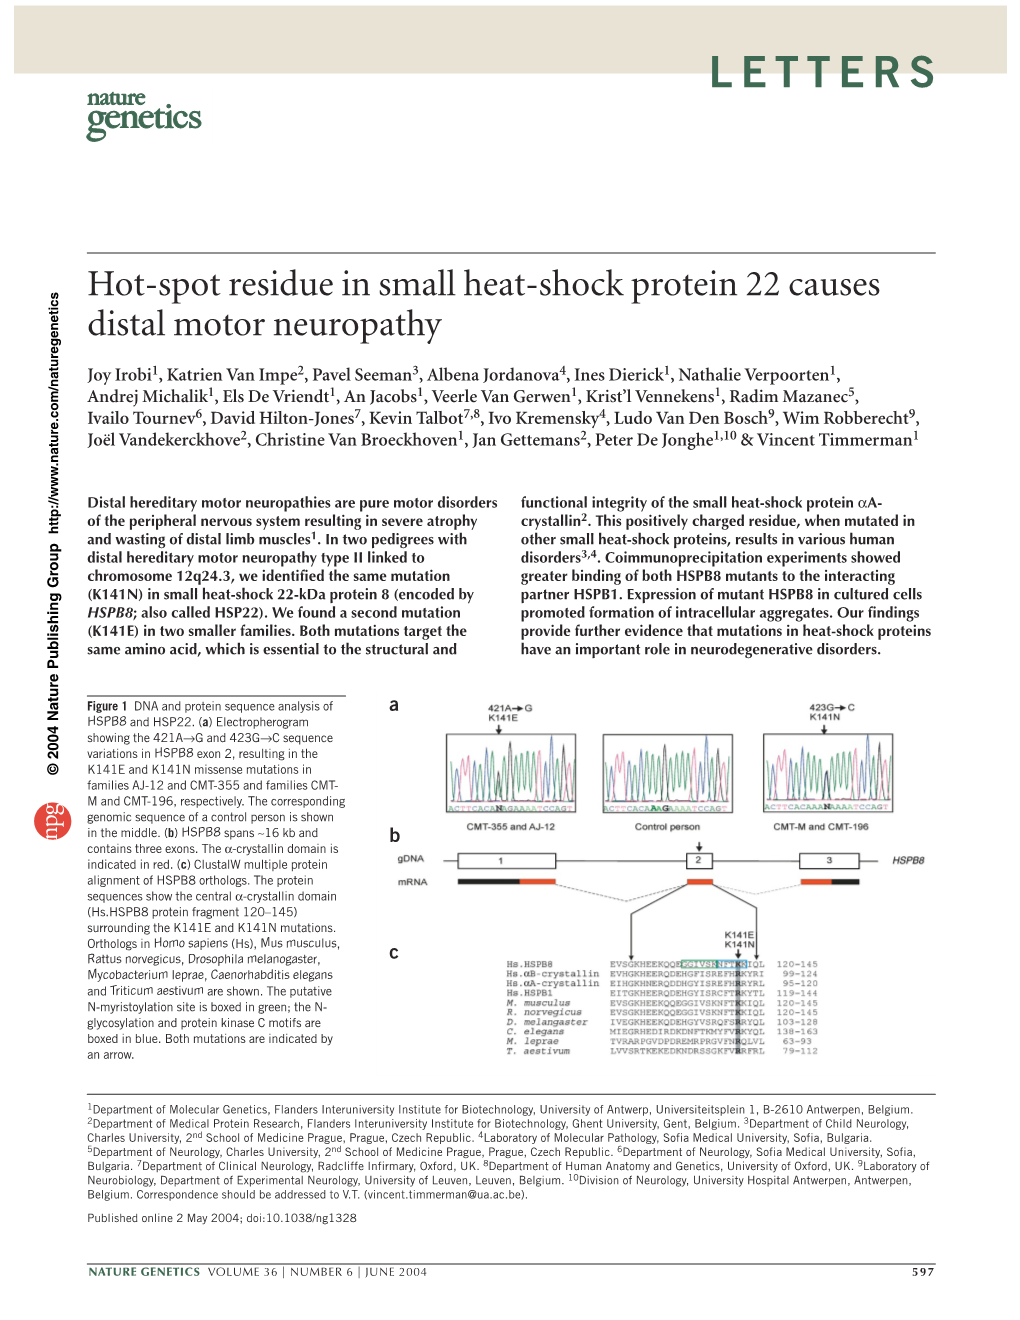 Hot-Spot Residue in Small Heat-Shock Protein 22 Causes Distal Motor Neuropathy